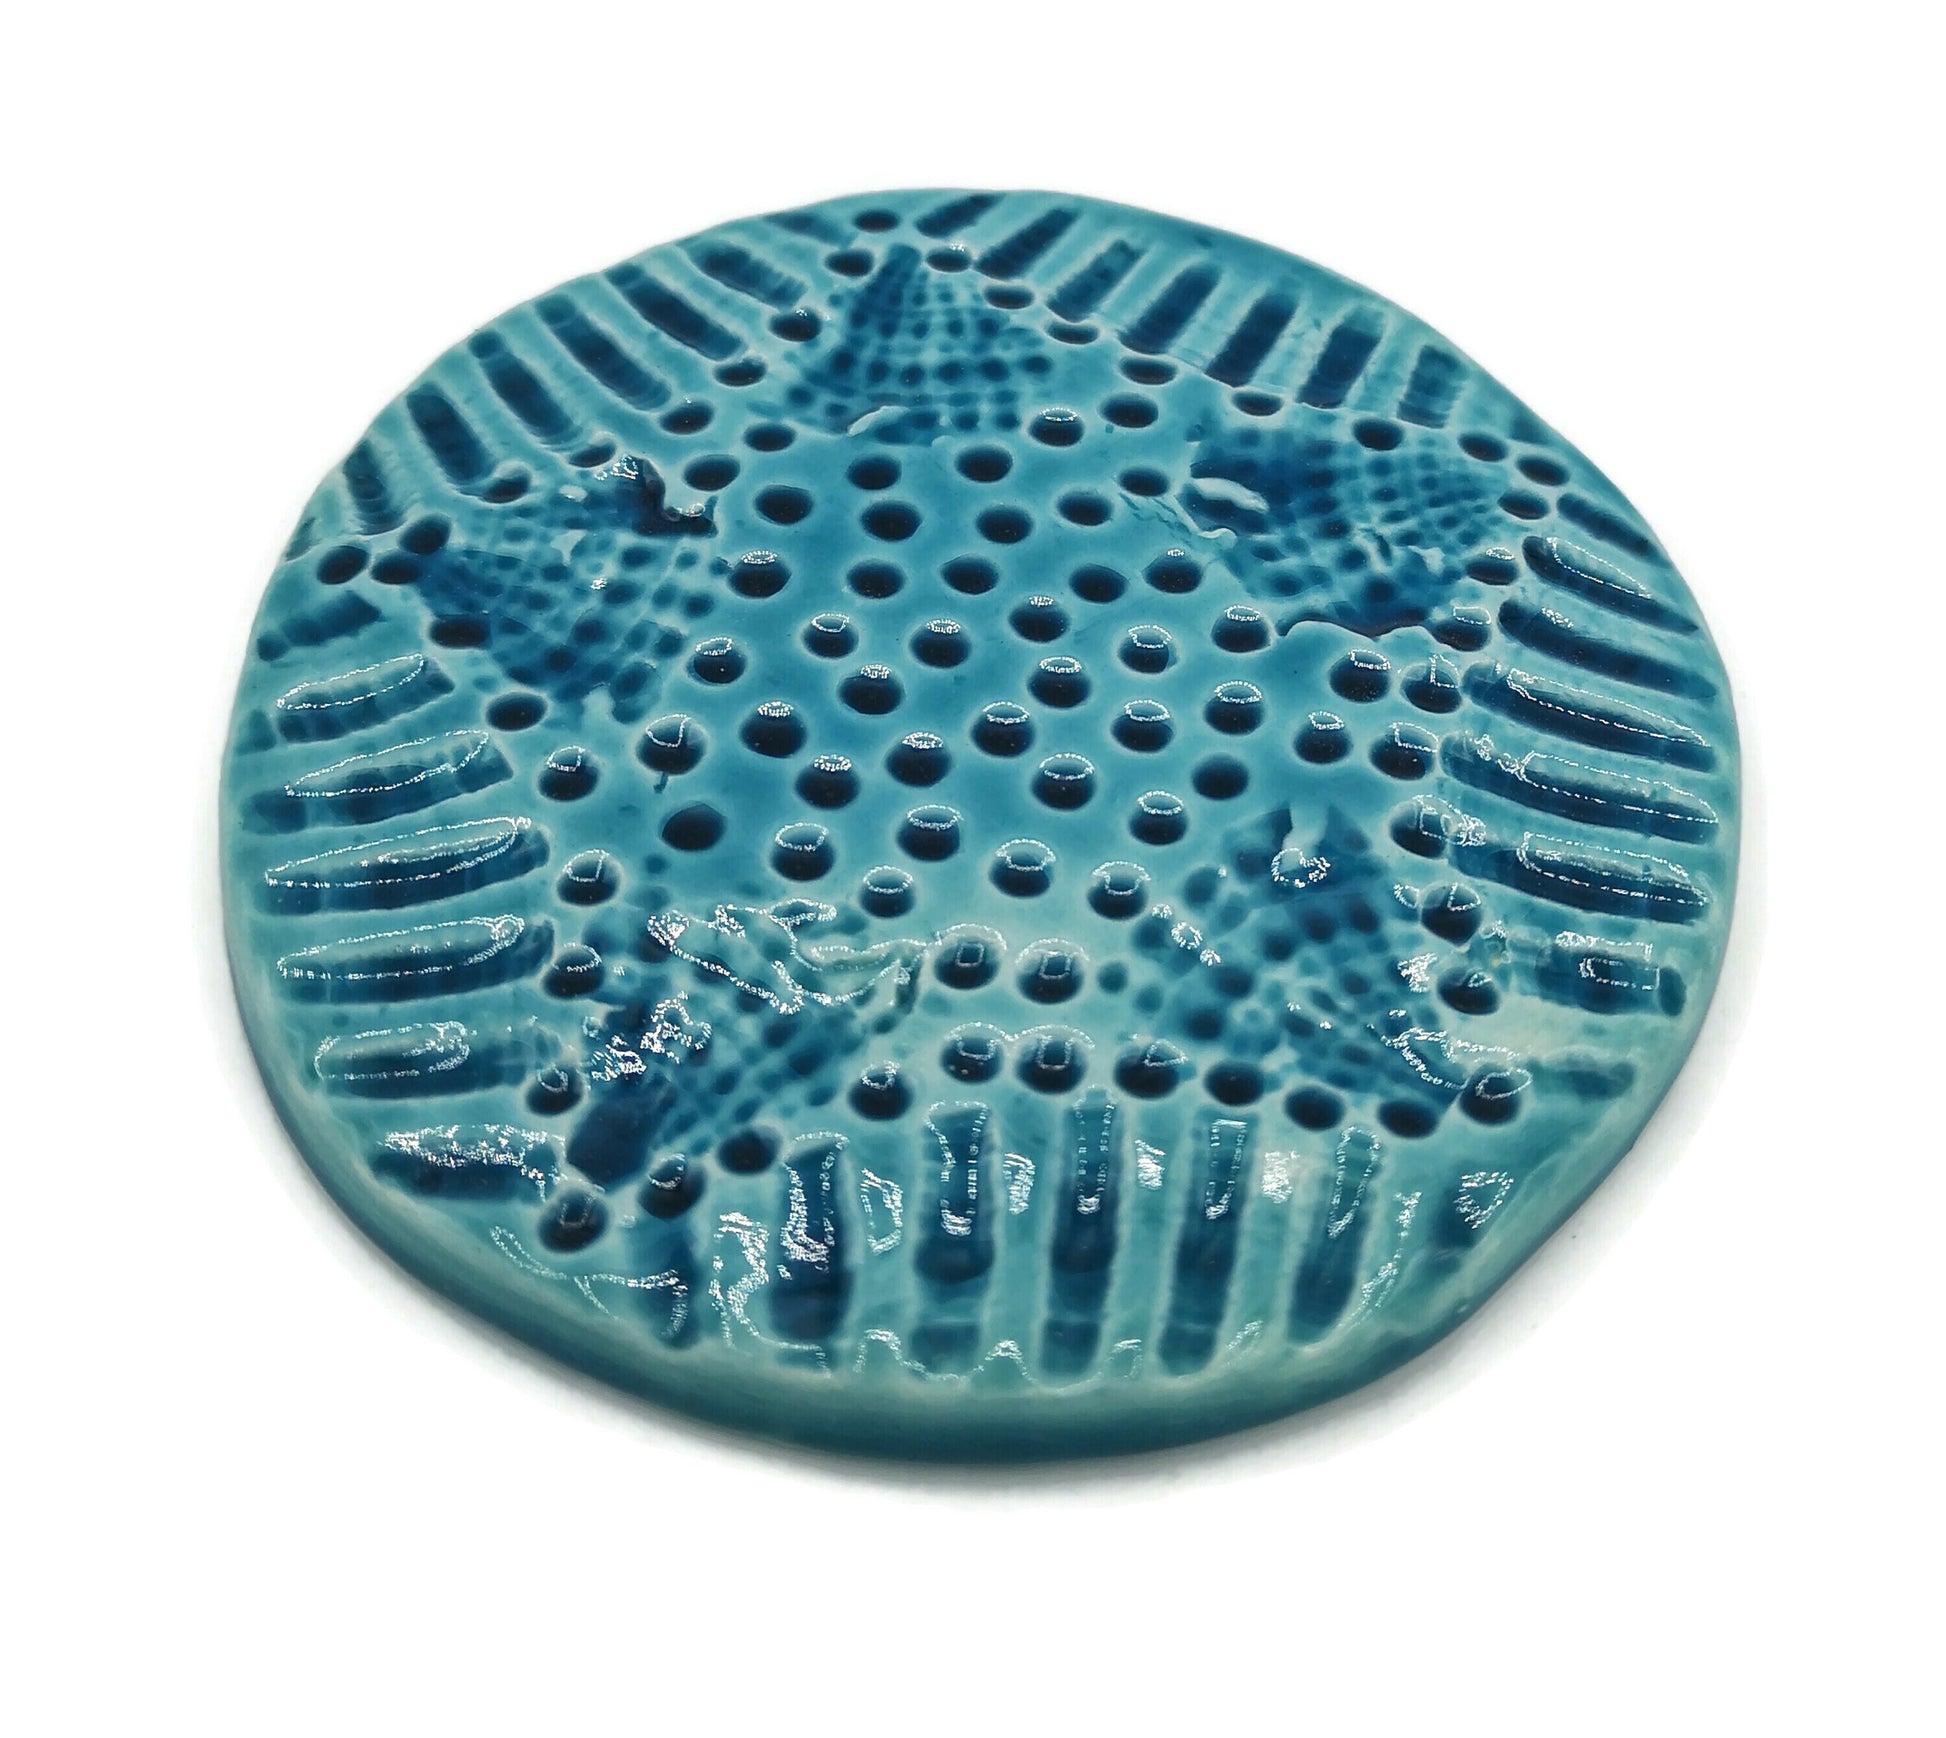 Handmade Modern Ceramic Round Coasters, Blue Textured Aesthetic Office Desk Accessories For Men, Housewarming Gift First Home - Ceramica Ana Rafael